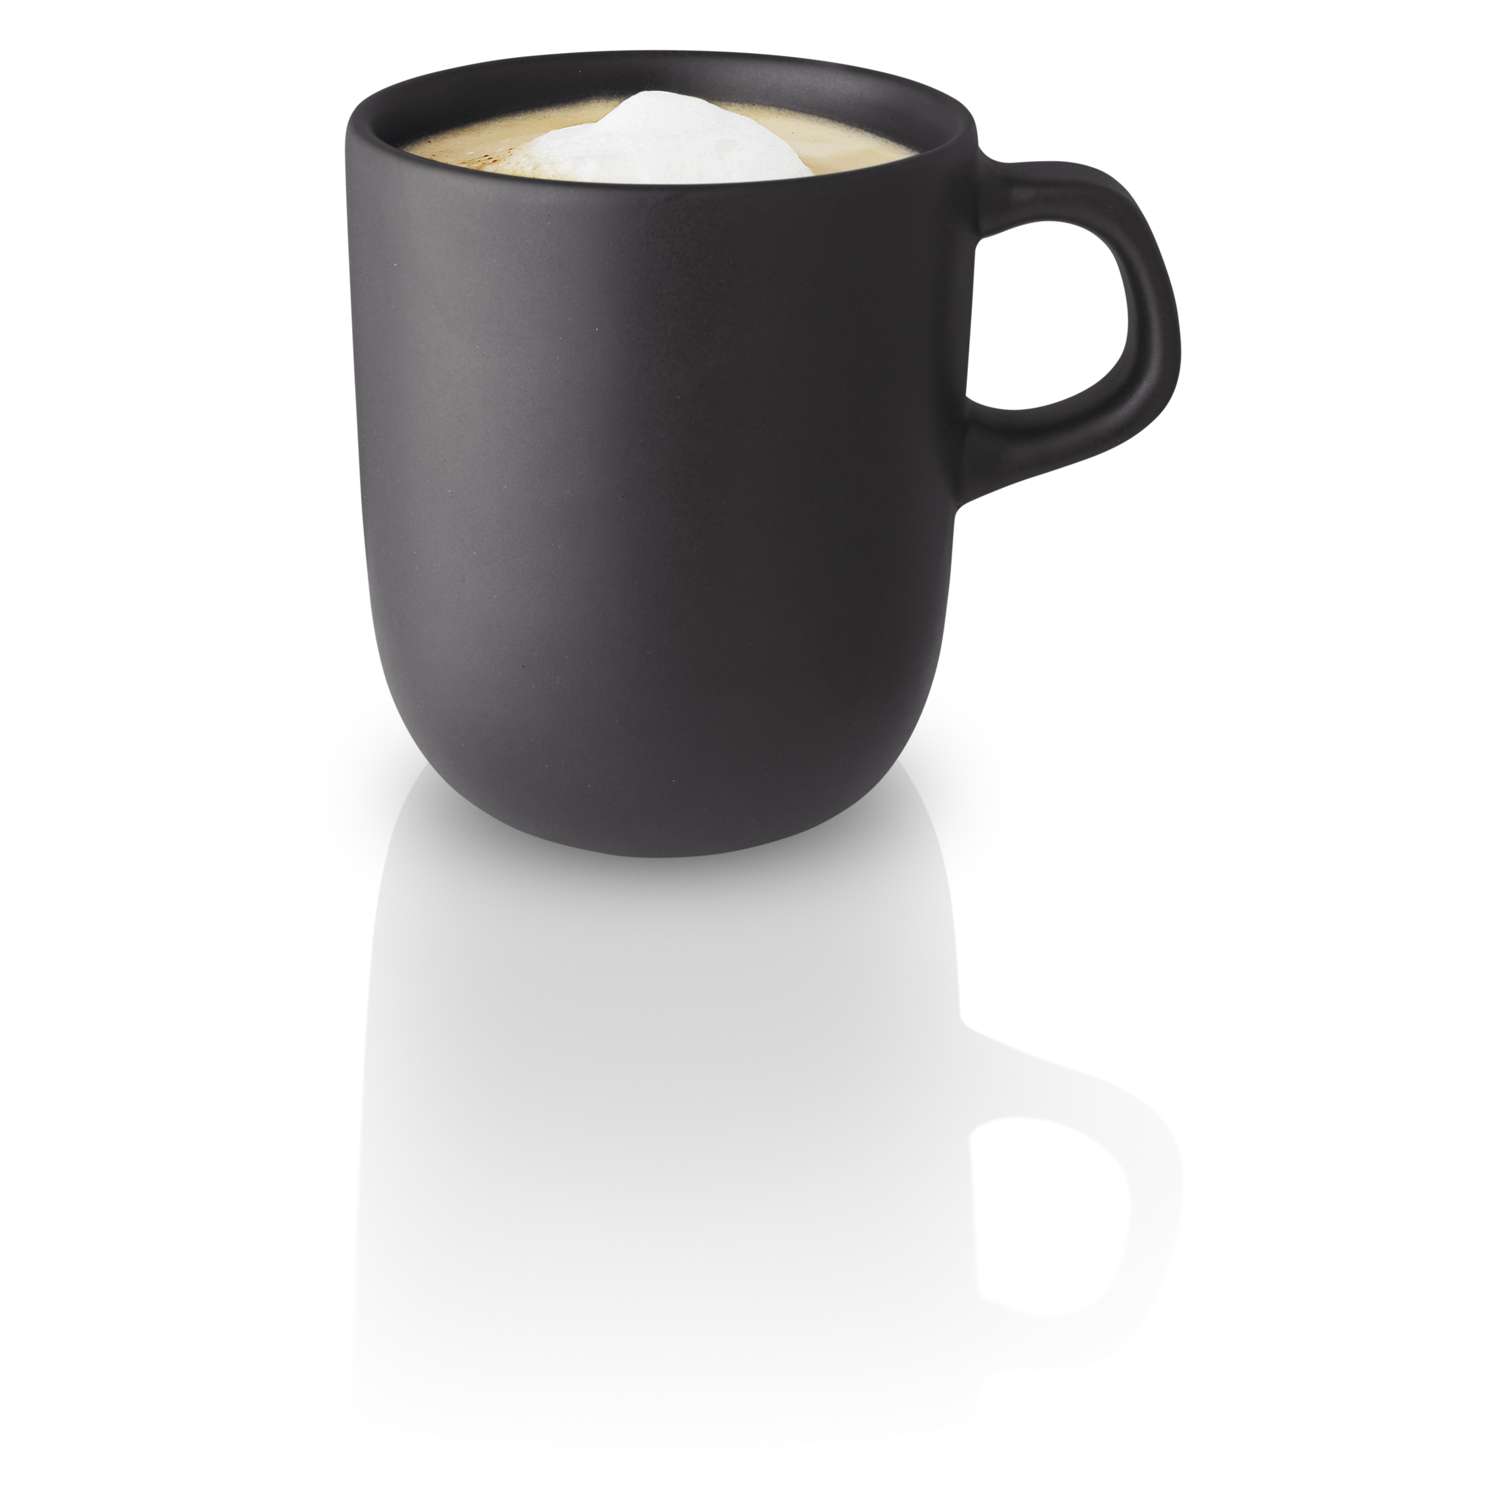 Eva Solo - Nordic Kitchen Cup with Saucer 20 CL, Black